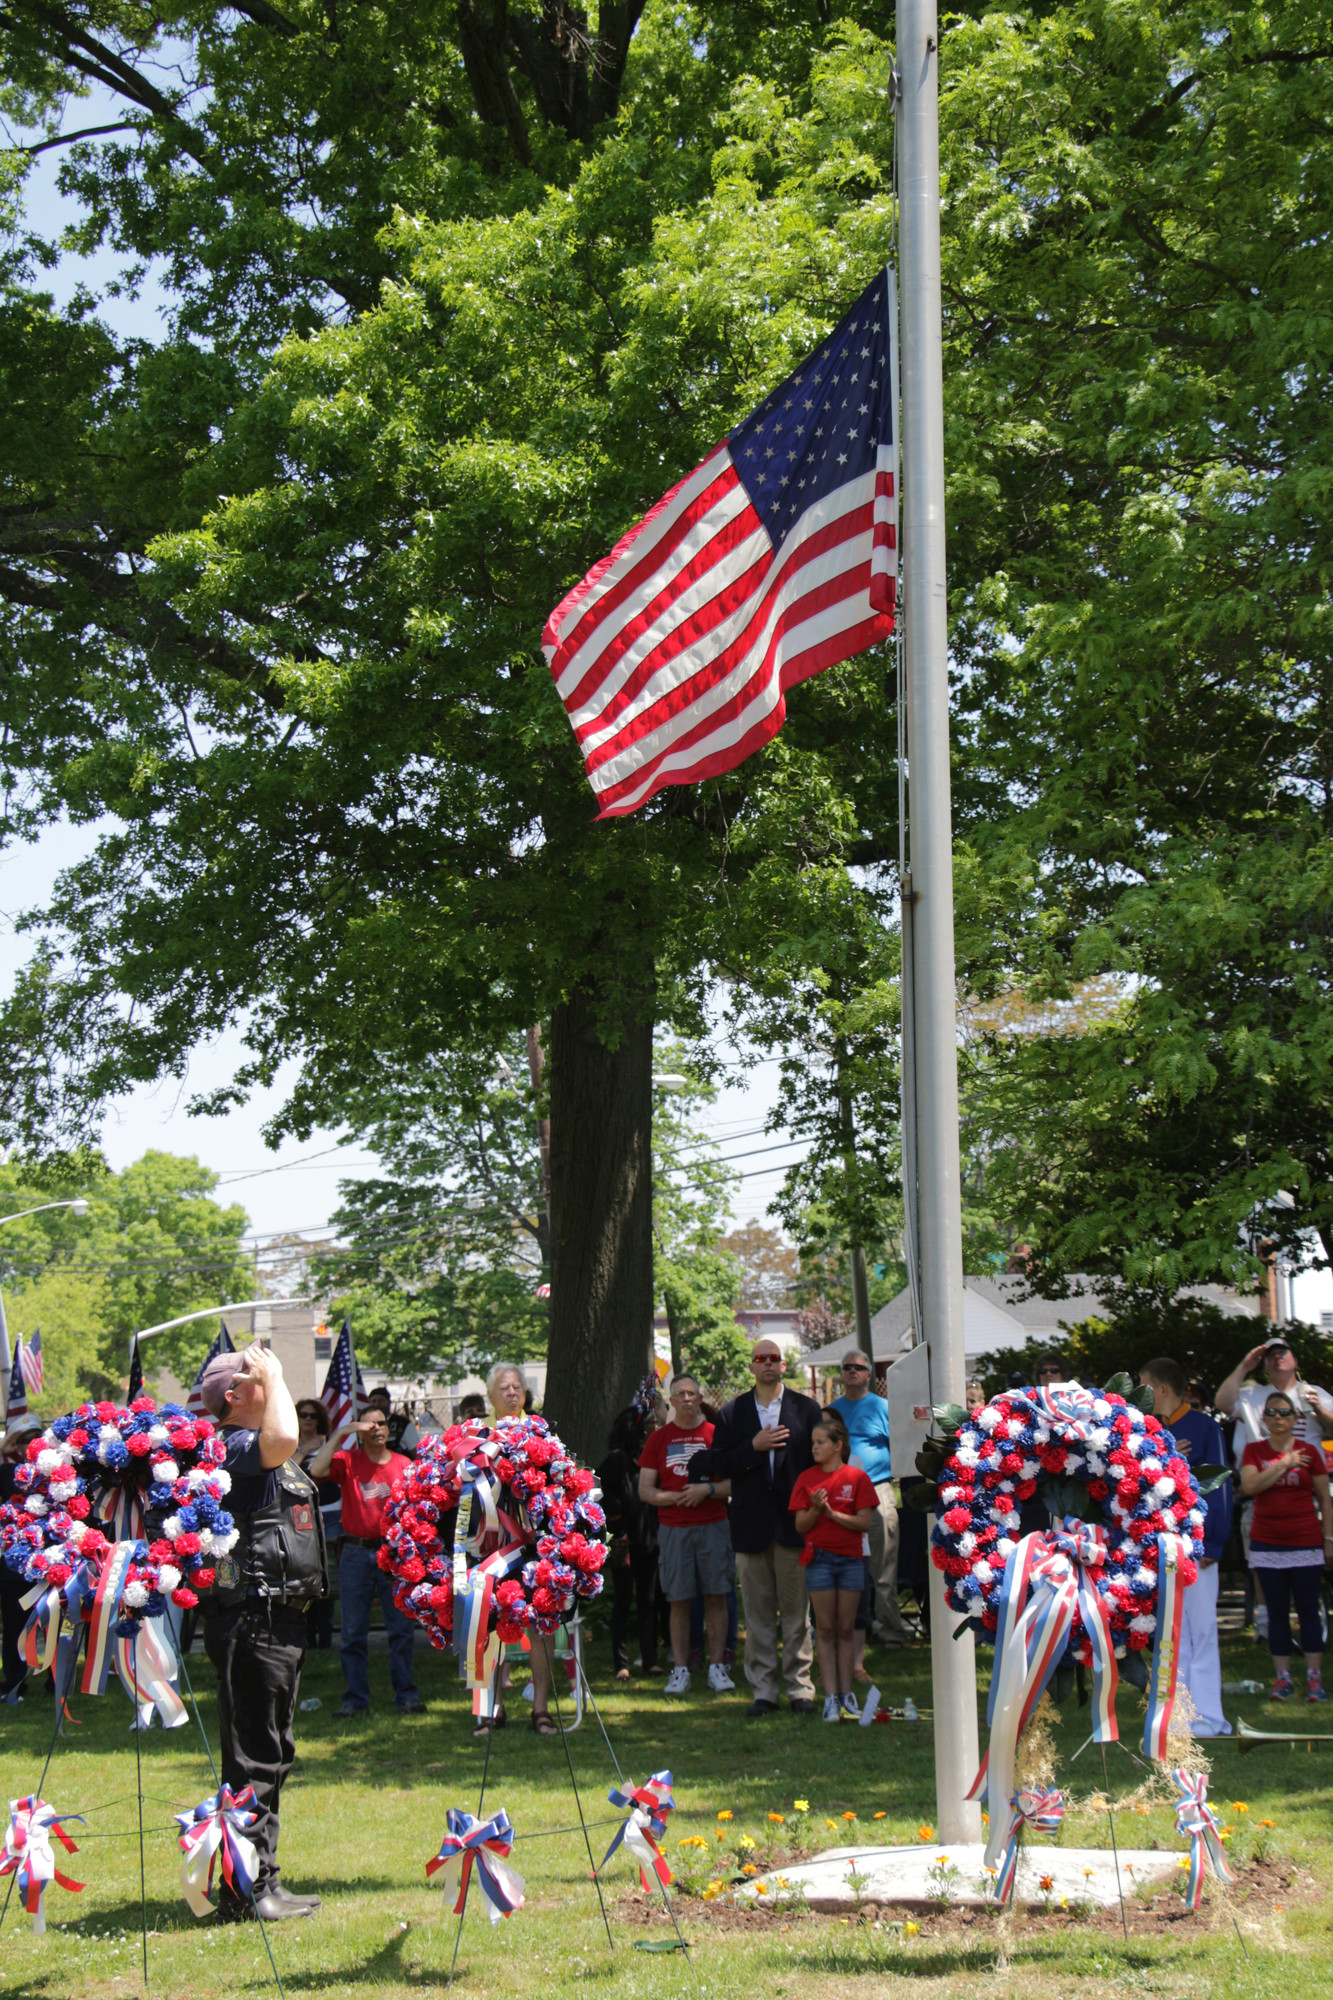 Hundreds of residents honored those who made the ultimate sacrifice on May 25 during the Memorial Day Parade down Grand Avenue and ceremony in Silver Lake Park. Peter Winninger, of the Forsaken Guns Motorcycle Club, saluted the flag.